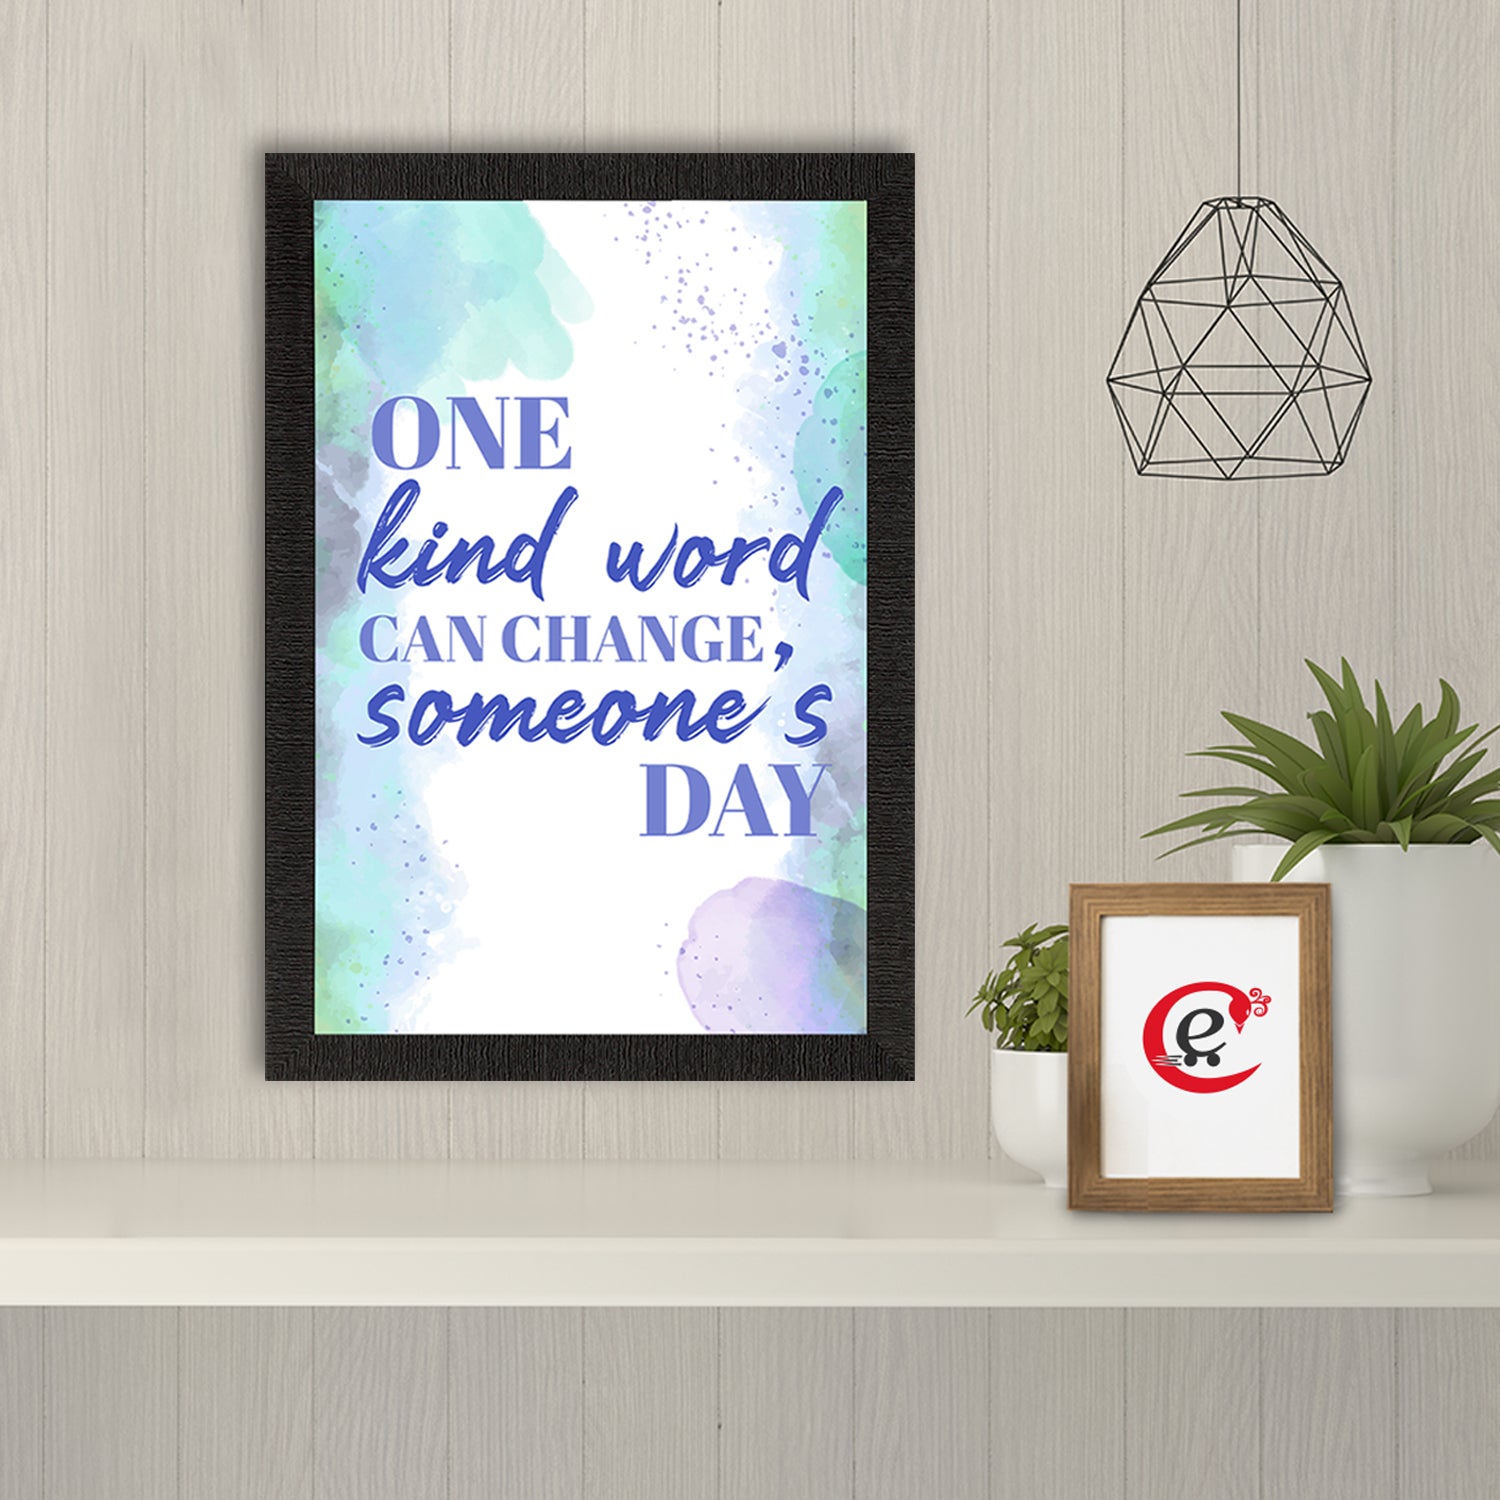 "One kind word can change someone's day" Motivational Quote Satin Matt Texture UV Art Painting 1